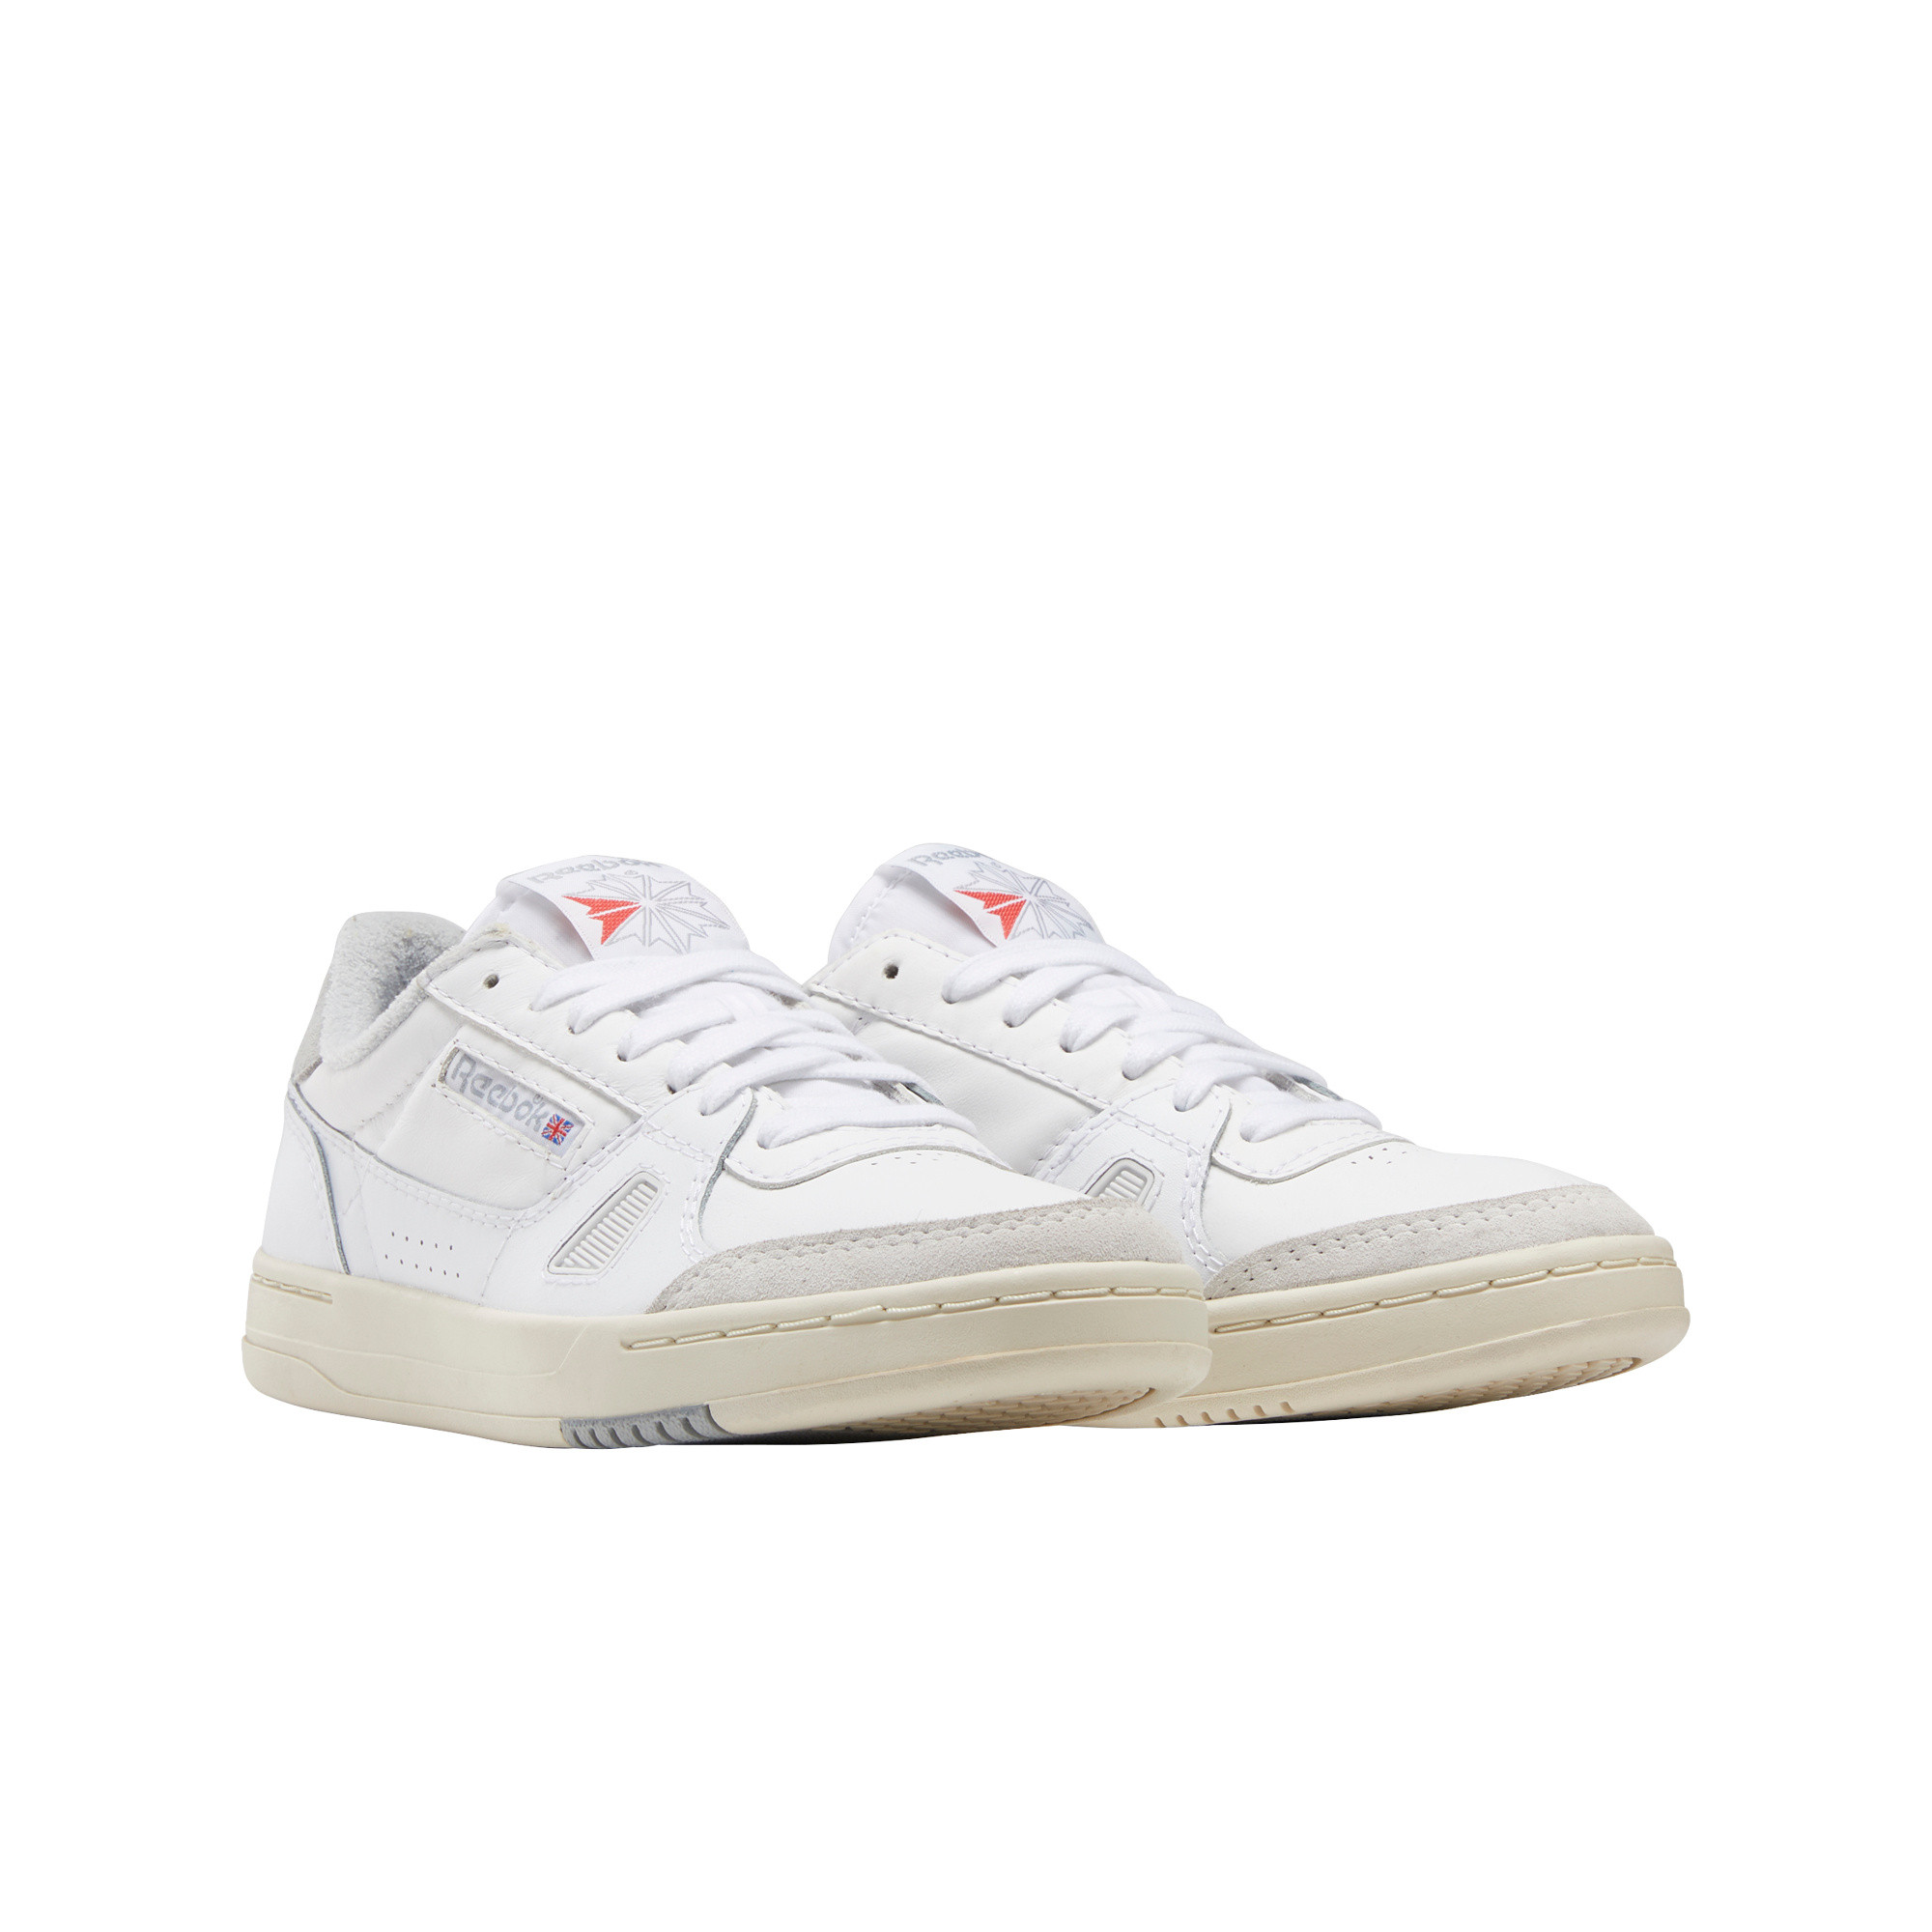 LT Court Shoes, White, large image number 9